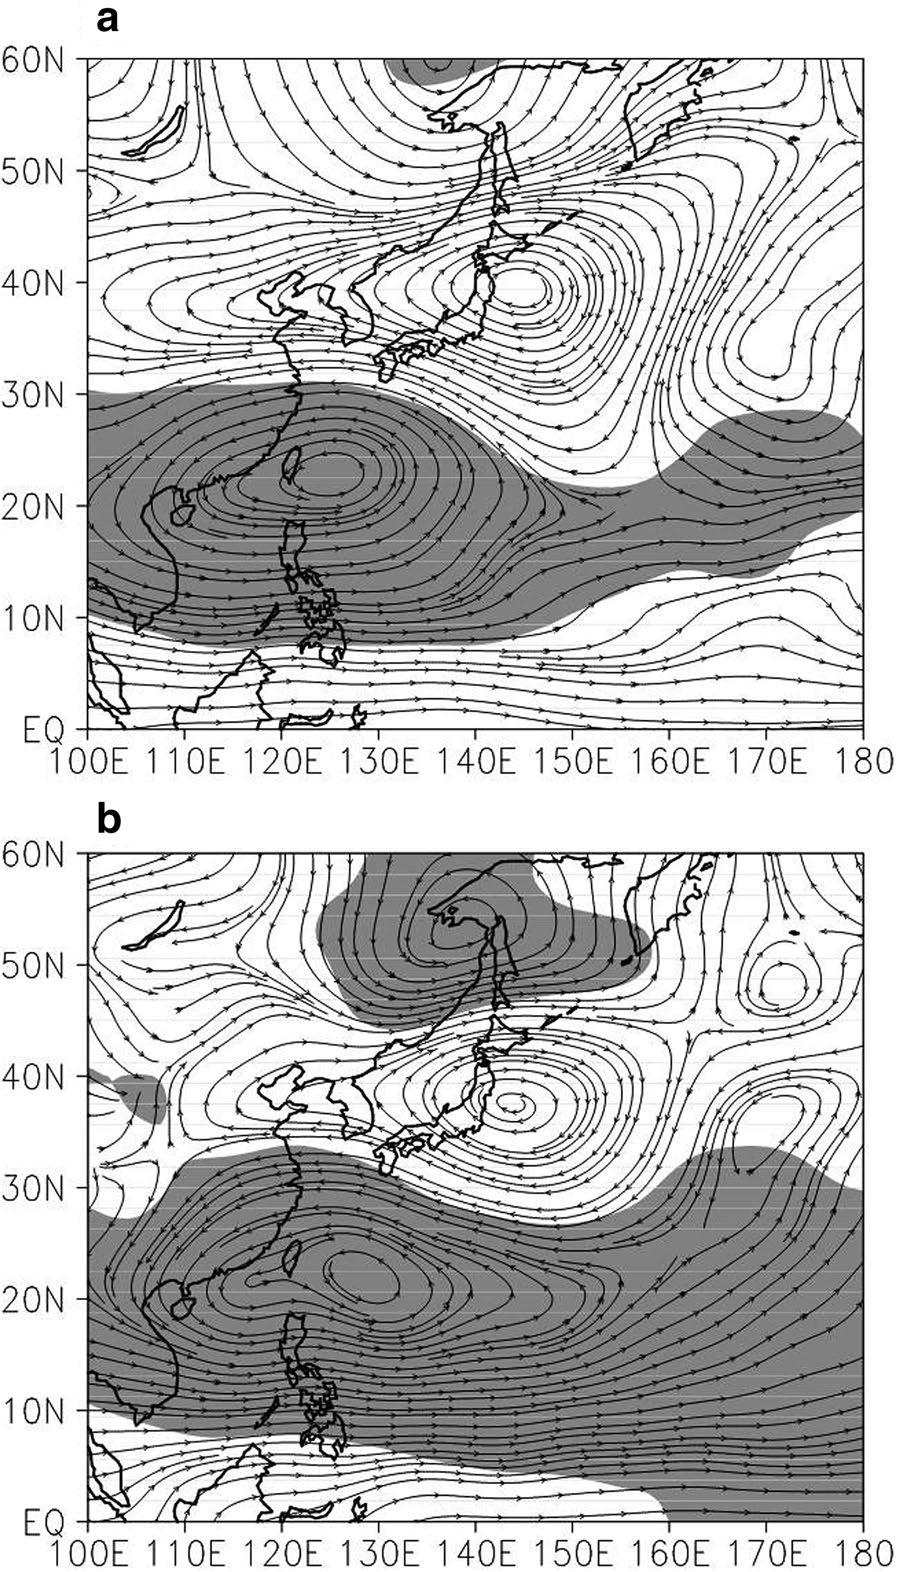 7 Differences in a 500 hpa and b 850 hpa streamlines between high EASMI years and low EASMI years.